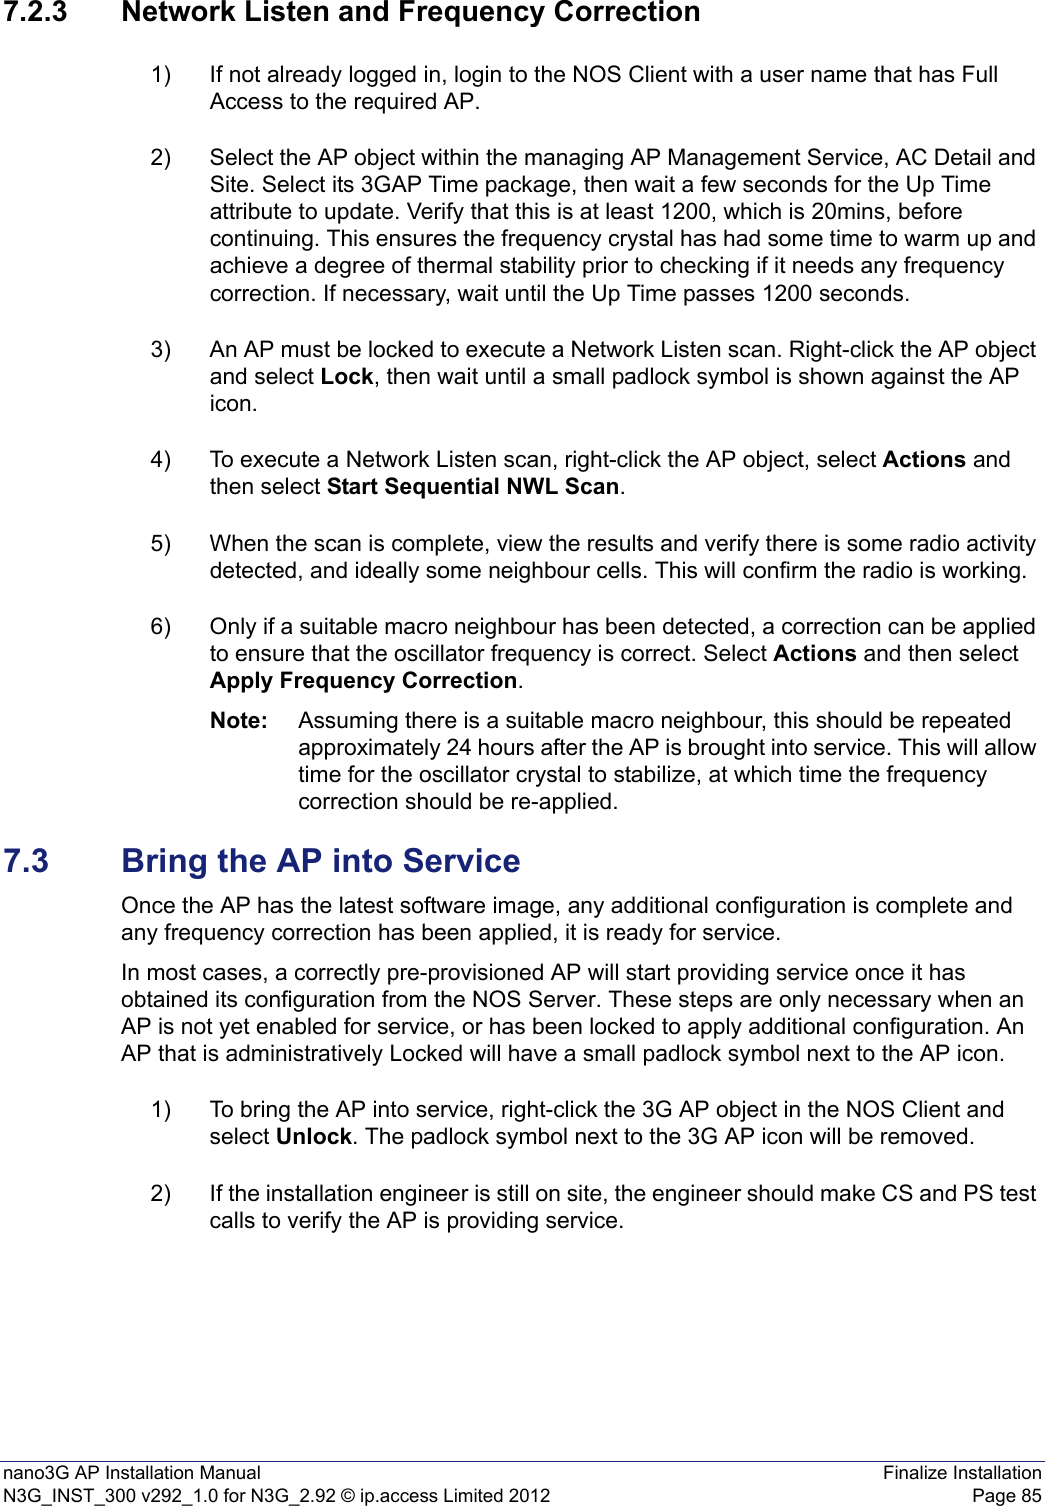 nano3G AP Installation Manual Finalize InstallationN3G_INST_300 v292_1.0 for N3G_2.92 © ip.access Limited 2012 Page 857.2.3 Network Listen and Frequency Correction1) If not already logged in, login to the NOS Client with a user name that has Full Access to the required AP.2) Select the AP object within the managing AP Management Service, AC Detail and Site. Select its 3GAP Time package, then wait a few seconds for the Up Time attribute to update. Verify that this is at least 1200, which is 20mins, before continuing. This ensures the frequency crystal has had some time to warm up and achieve a degree of thermal stability prior to checking if it needs any frequency correction. If necessary, wait until the Up Time passes 1200 seconds.3) An AP must be locked to execute a Network Listen scan. Right-click the AP object and select Lock, then wait until a small padlock symbol is shown against the AP icon. 4) To execute a Network Listen scan, right-click the AP object, select Actions and then select Start Sequential NWL Scan. 5) When the scan is complete, view the results and verify there is some radio activity detected, and ideally some neighbour cells. This will confirm the radio is working.6) Only if a suitable macro neighbour has been detected, a correction can be applied to ensure that the oscillator frequency is correct. Select Actions and then select Apply Frequency Correction.Note: Assuming there is a suitable macro neighbour, this should be repeated approximately 24 hours after the AP is brought into service. This will allow time for the oscillator crystal to stabilize, at which time the frequency correction should be re-applied. 7.3 Bring the AP into ServiceOnce the AP has the latest software image, any additional configuration is complete and any frequency correction has been applied, it is ready for service.In most cases, a correctly pre-provisioned AP will start providing service once it has obtained its configuration from the NOS Server. These steps are only necessary when an AP is not yet enabled for service, or has been locked to apply additional configuration. An AP that is administratively Locked will have a small padlock symbol next to the AP icon. 1) To bring the AP into service, right-click the 3G AP object in the NOS Client and select Unlock. The padlock symbol next to the 3G AP icon will be removed.2) If the installation engineer is still on site, the engineer should make CS and PS test calls to verify the AP is providing service. 